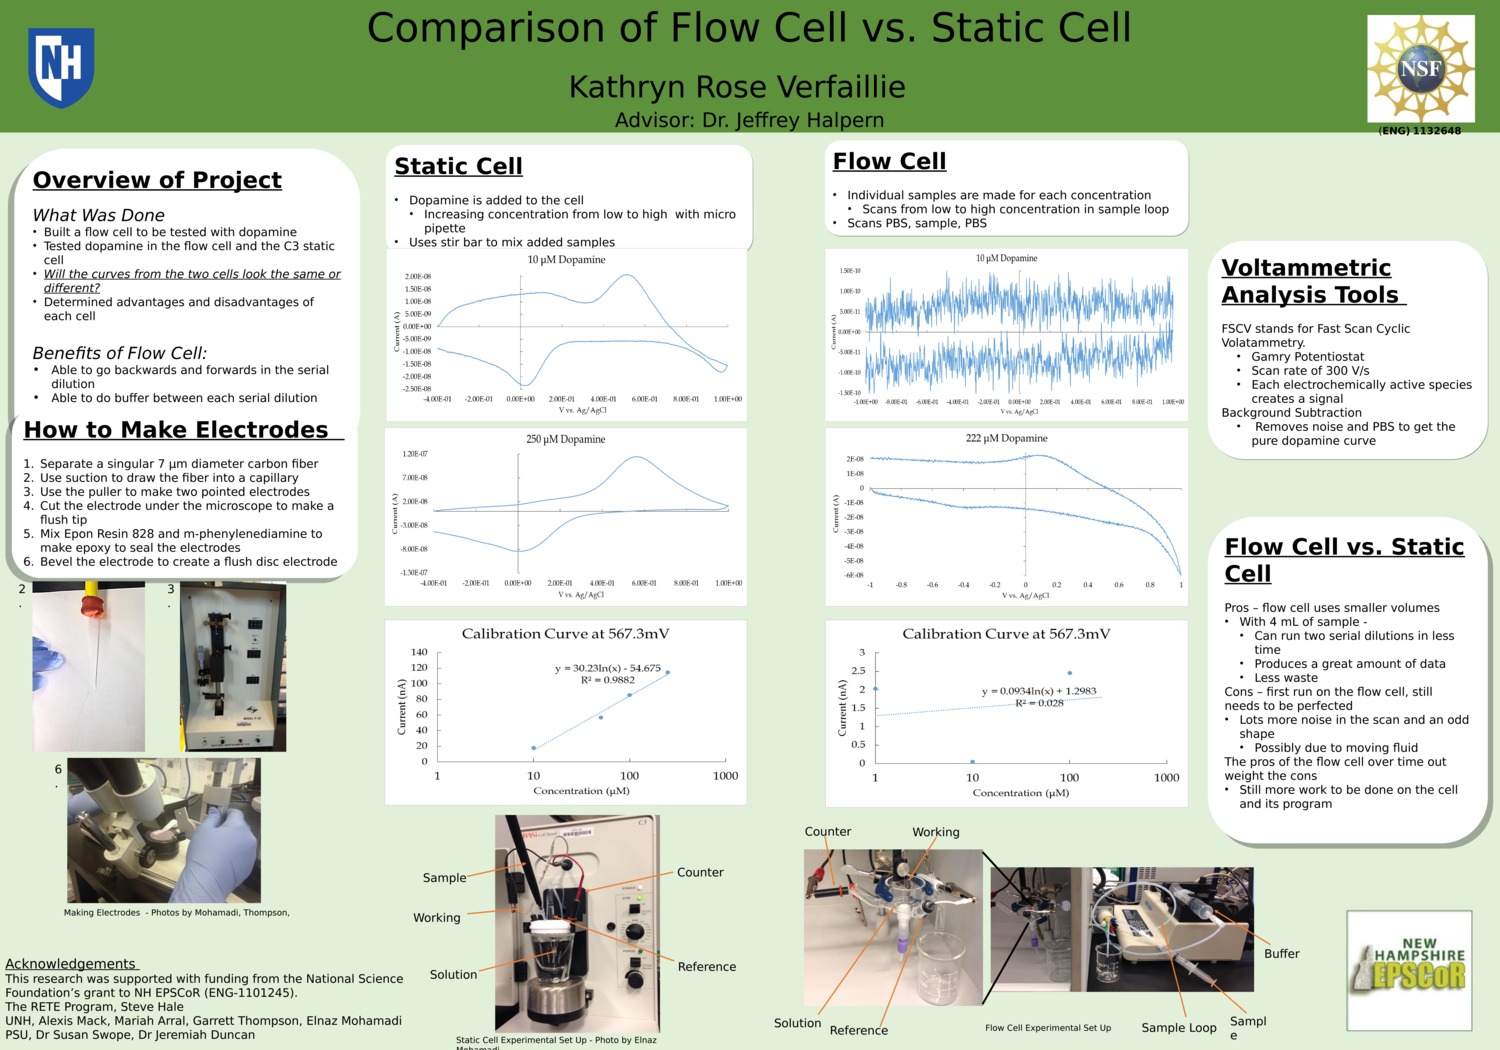 Flow Cell Vs Static Cell by srhale